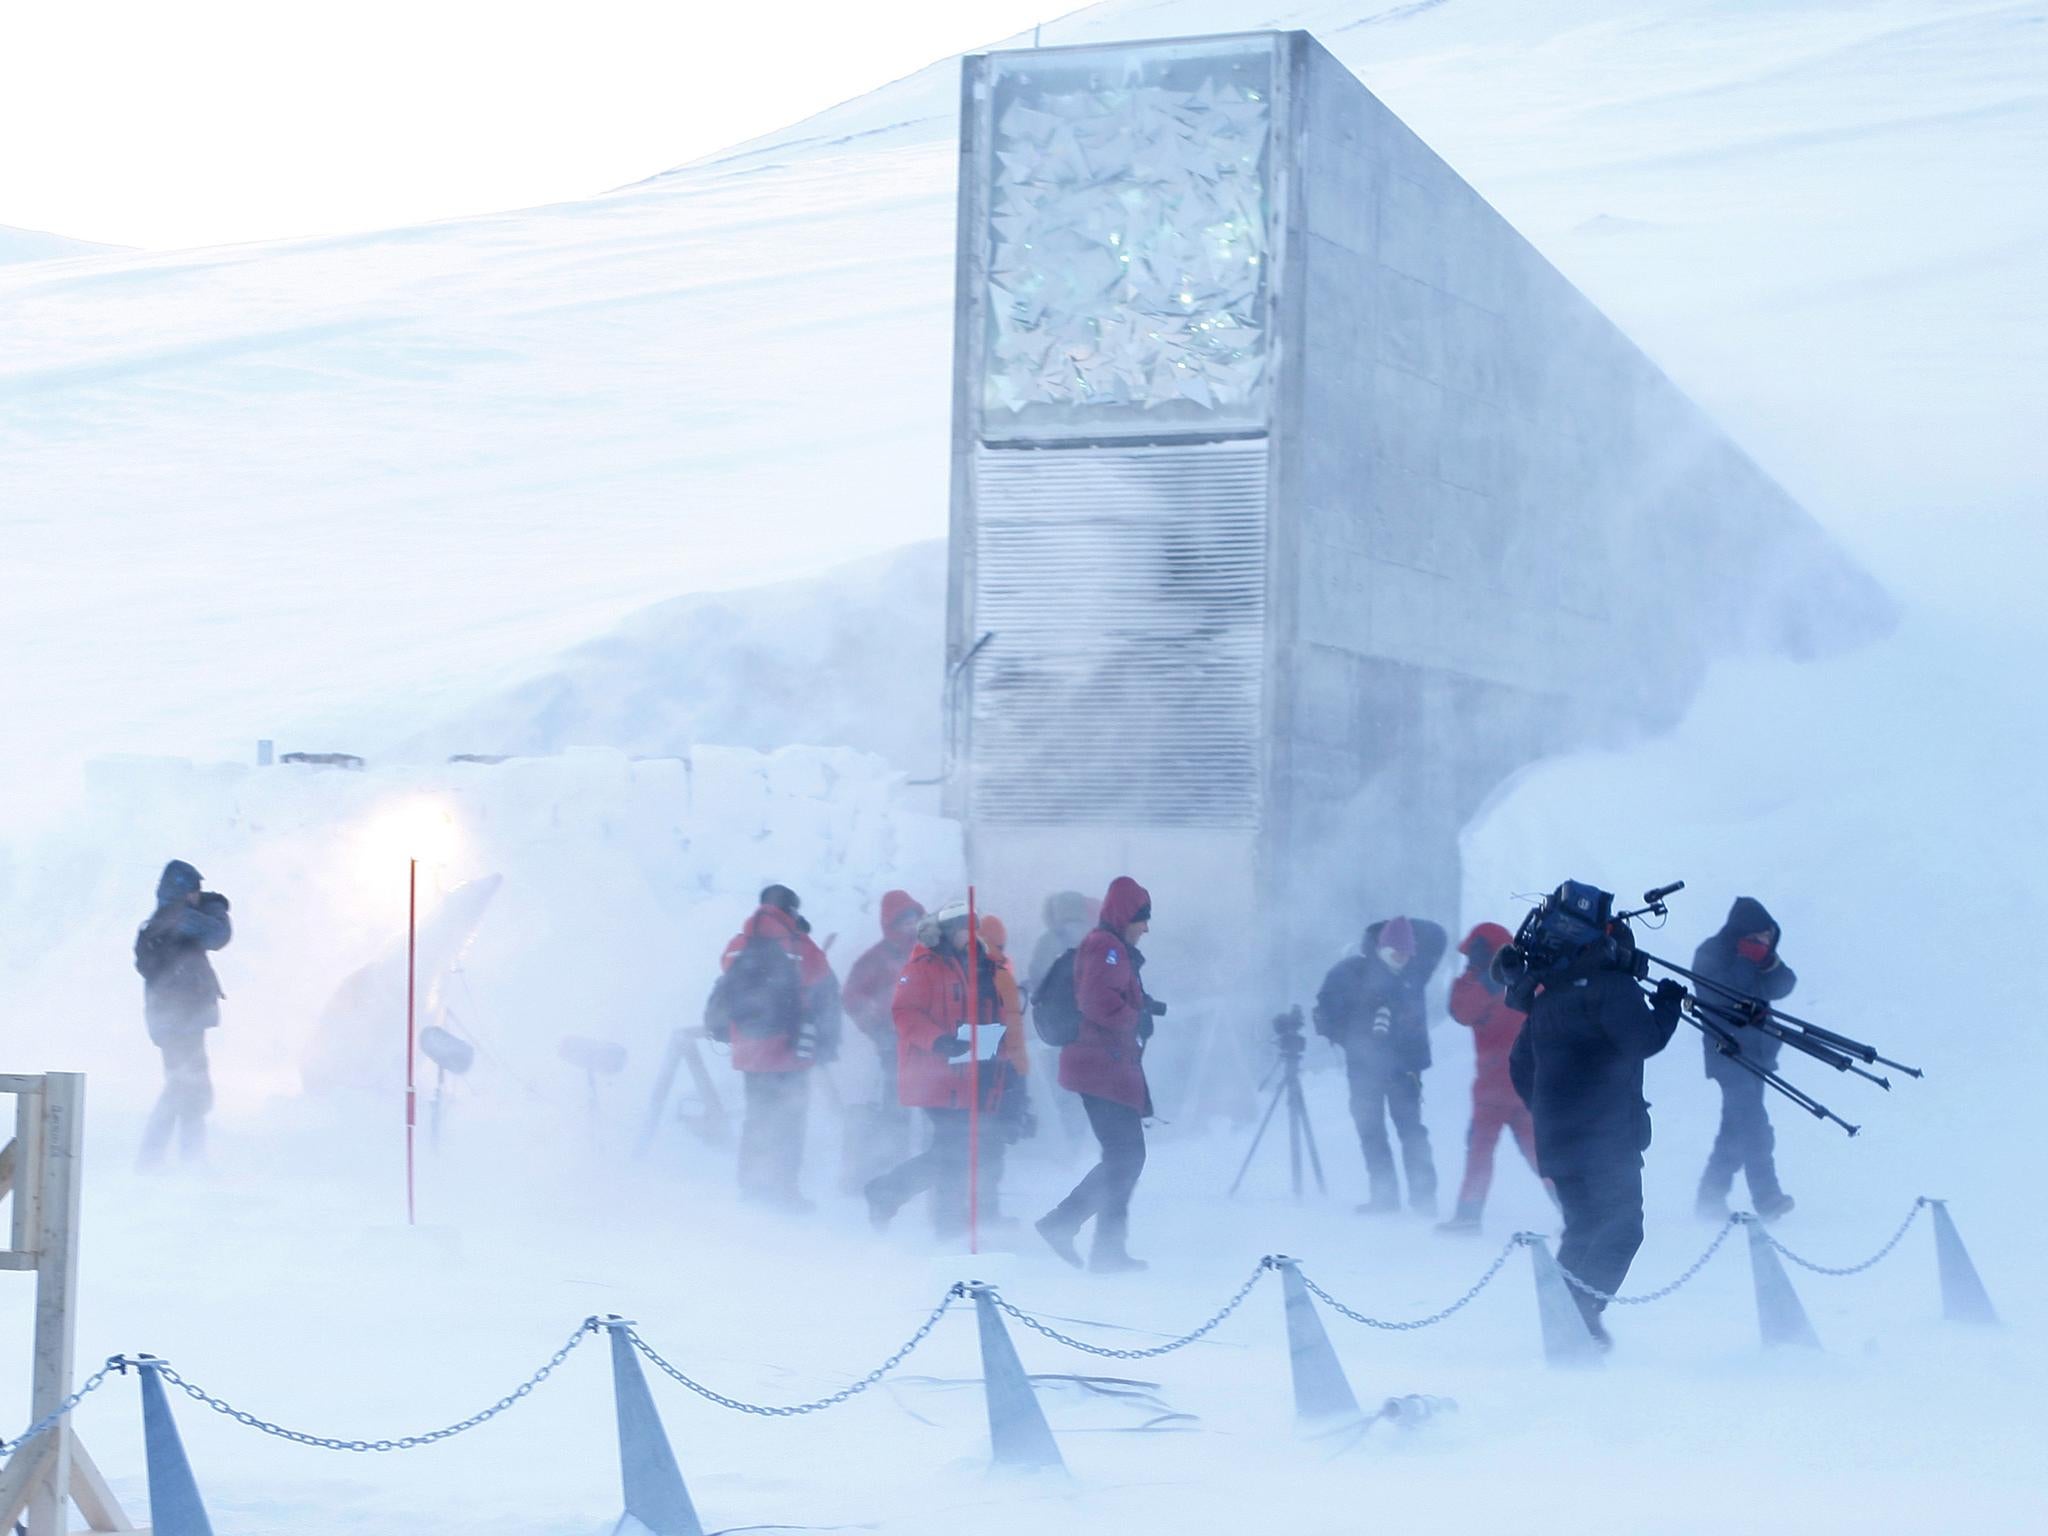 Journalists and cameramen walk near the entrance of the Svalbard Global Seed Vault